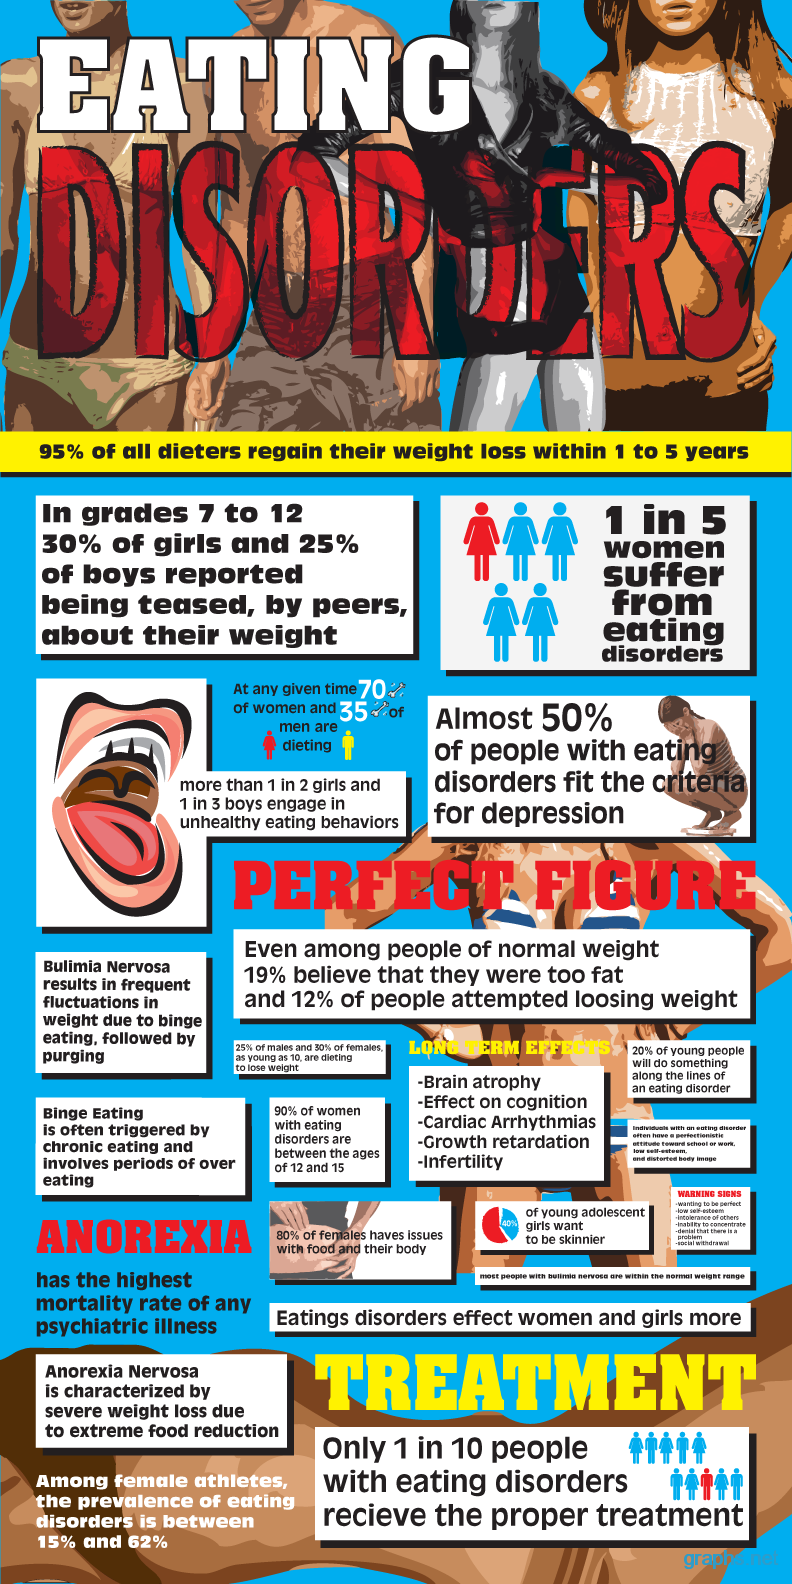 eating disorders facts and myths